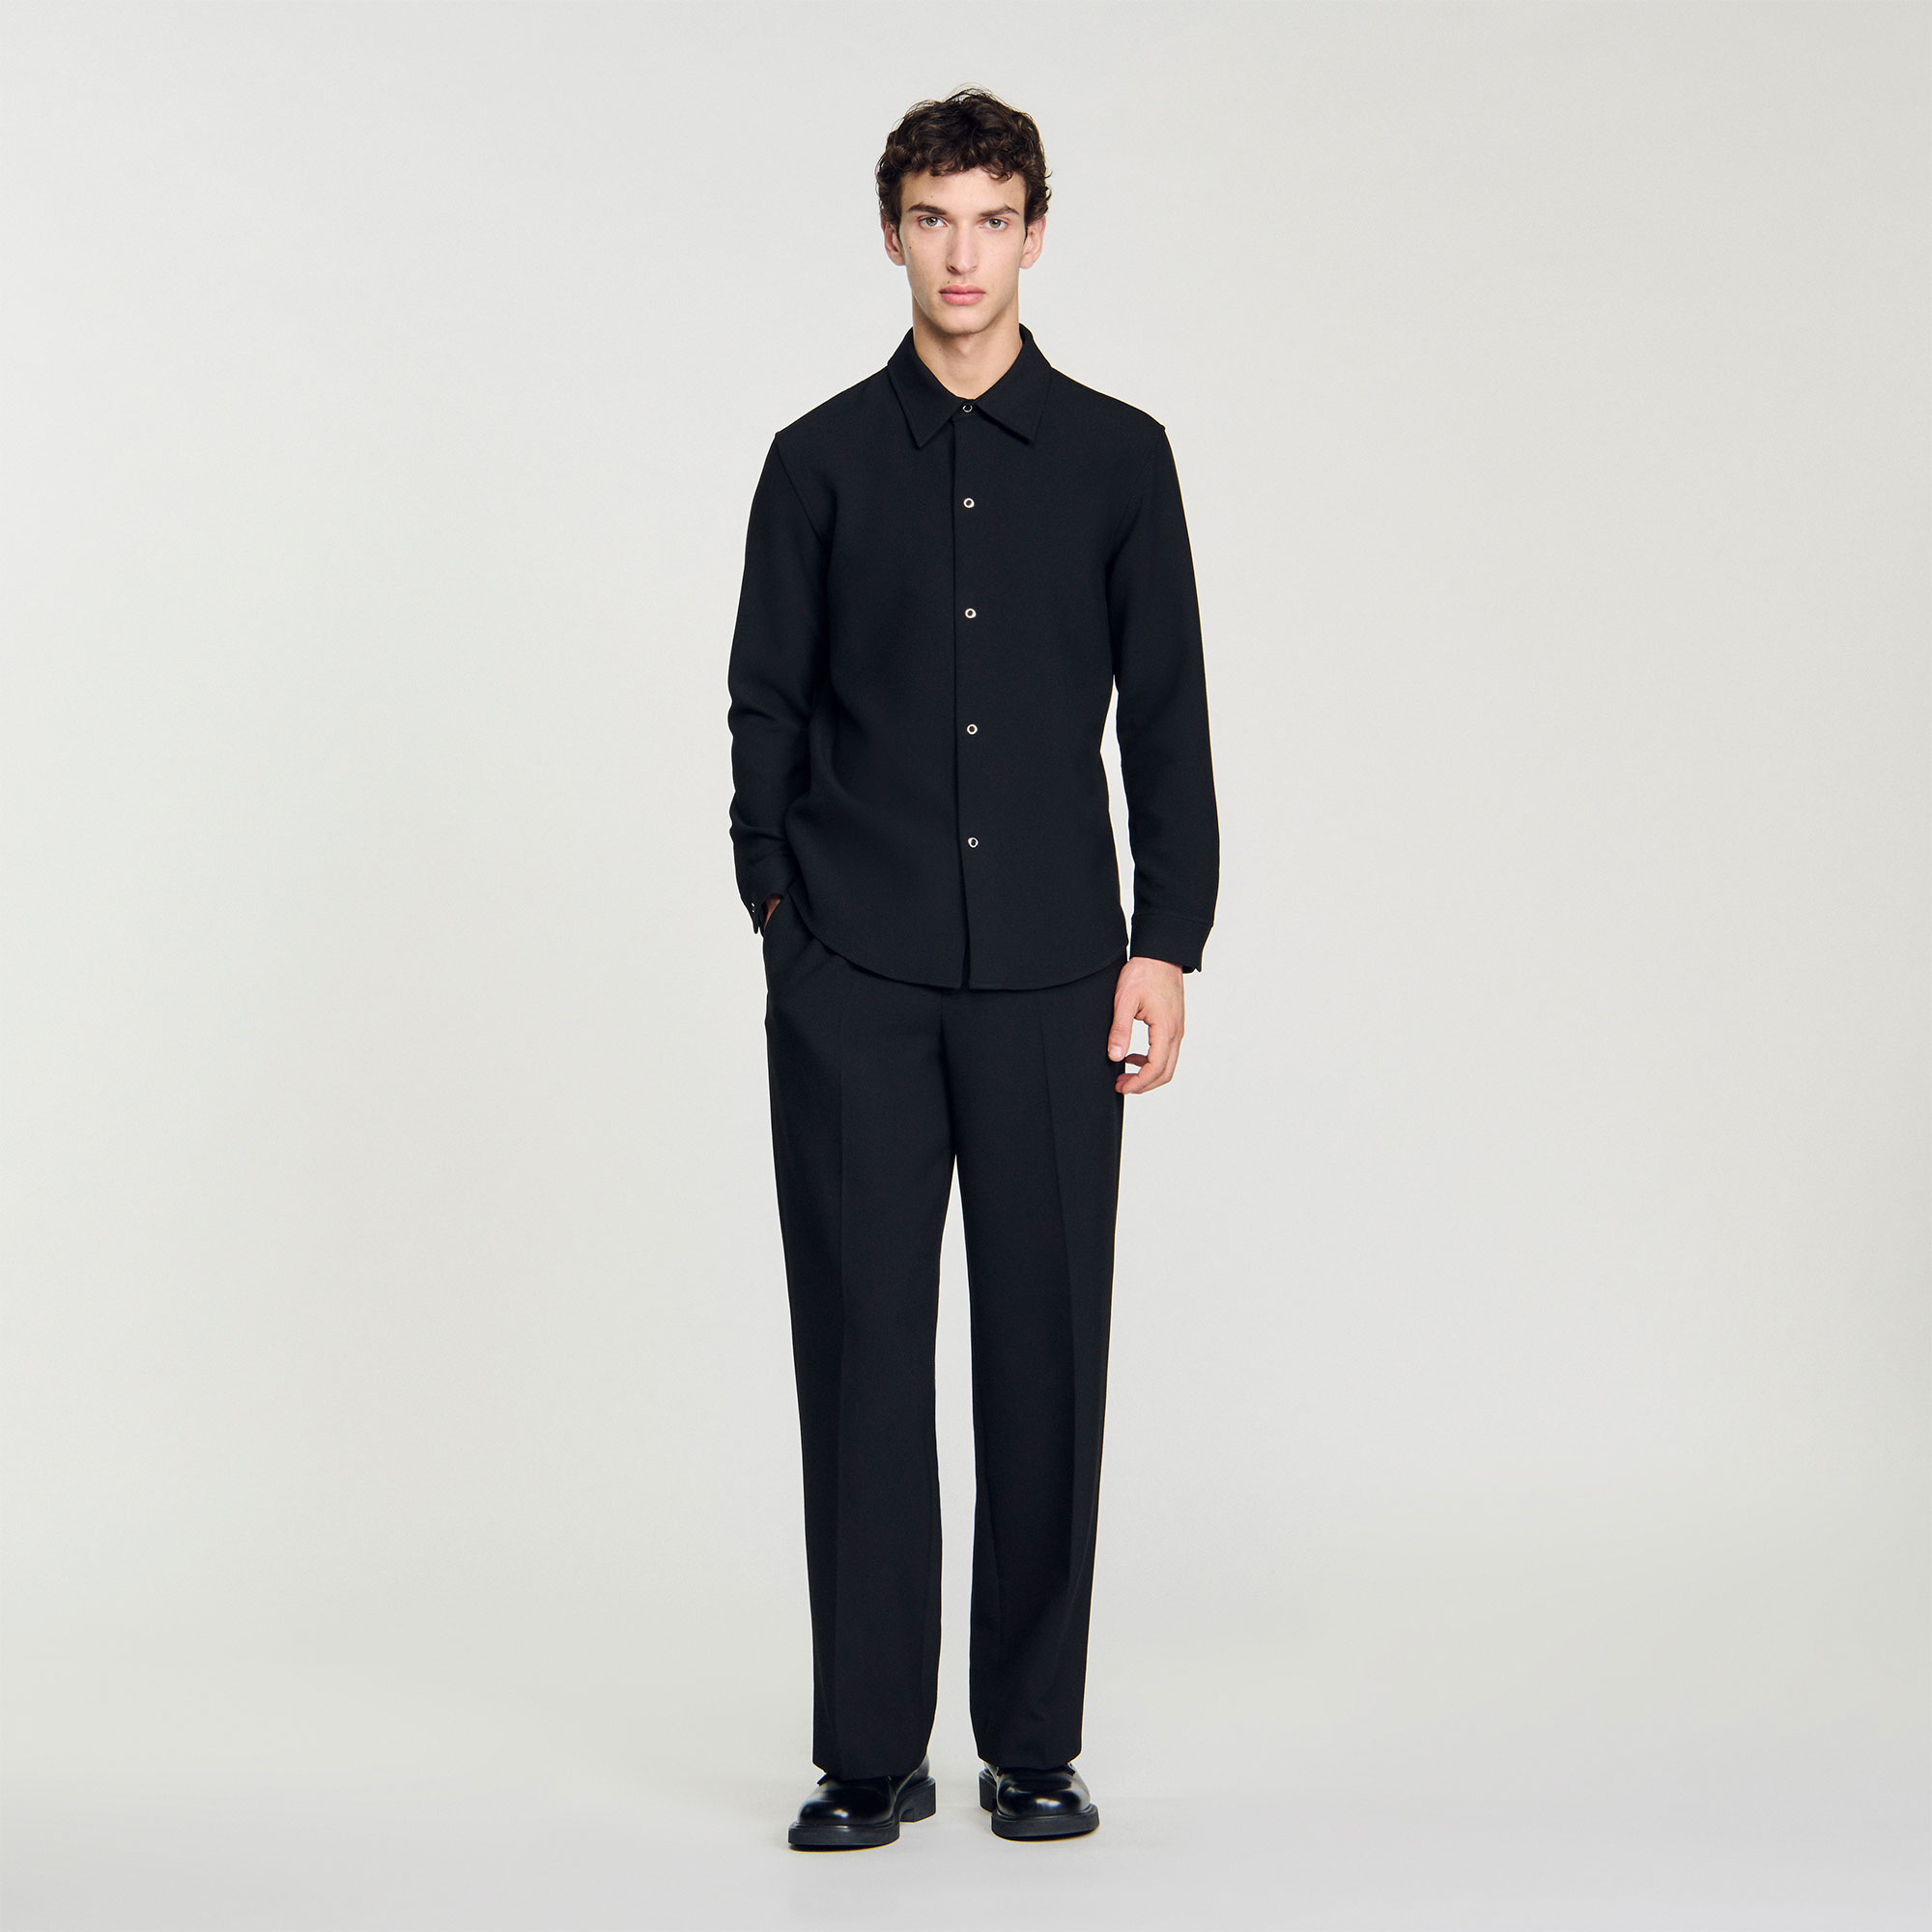 Sandro polyester Jersey buttoned shirt with long sleeves, a classic collar, and snap-fastened cuffs